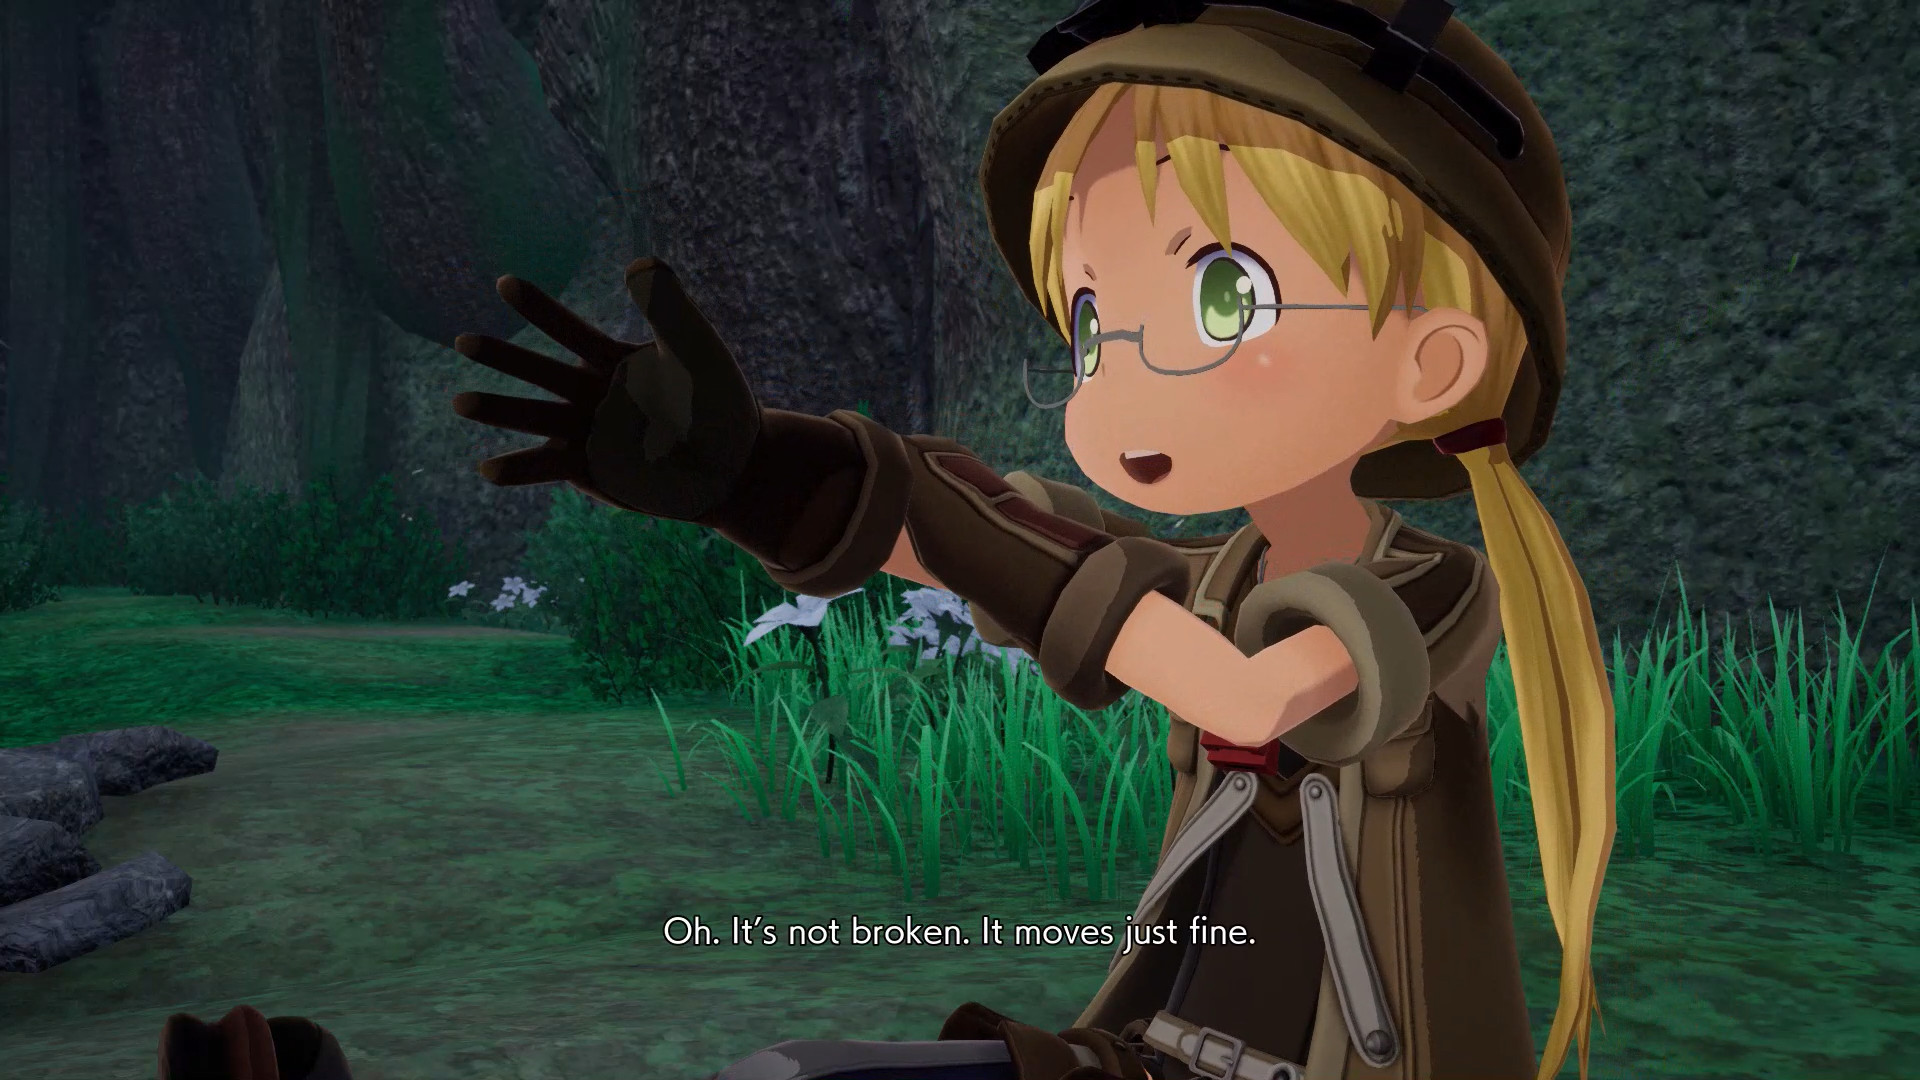 Made in Abyss: Binary Star Falling into Darkness Review